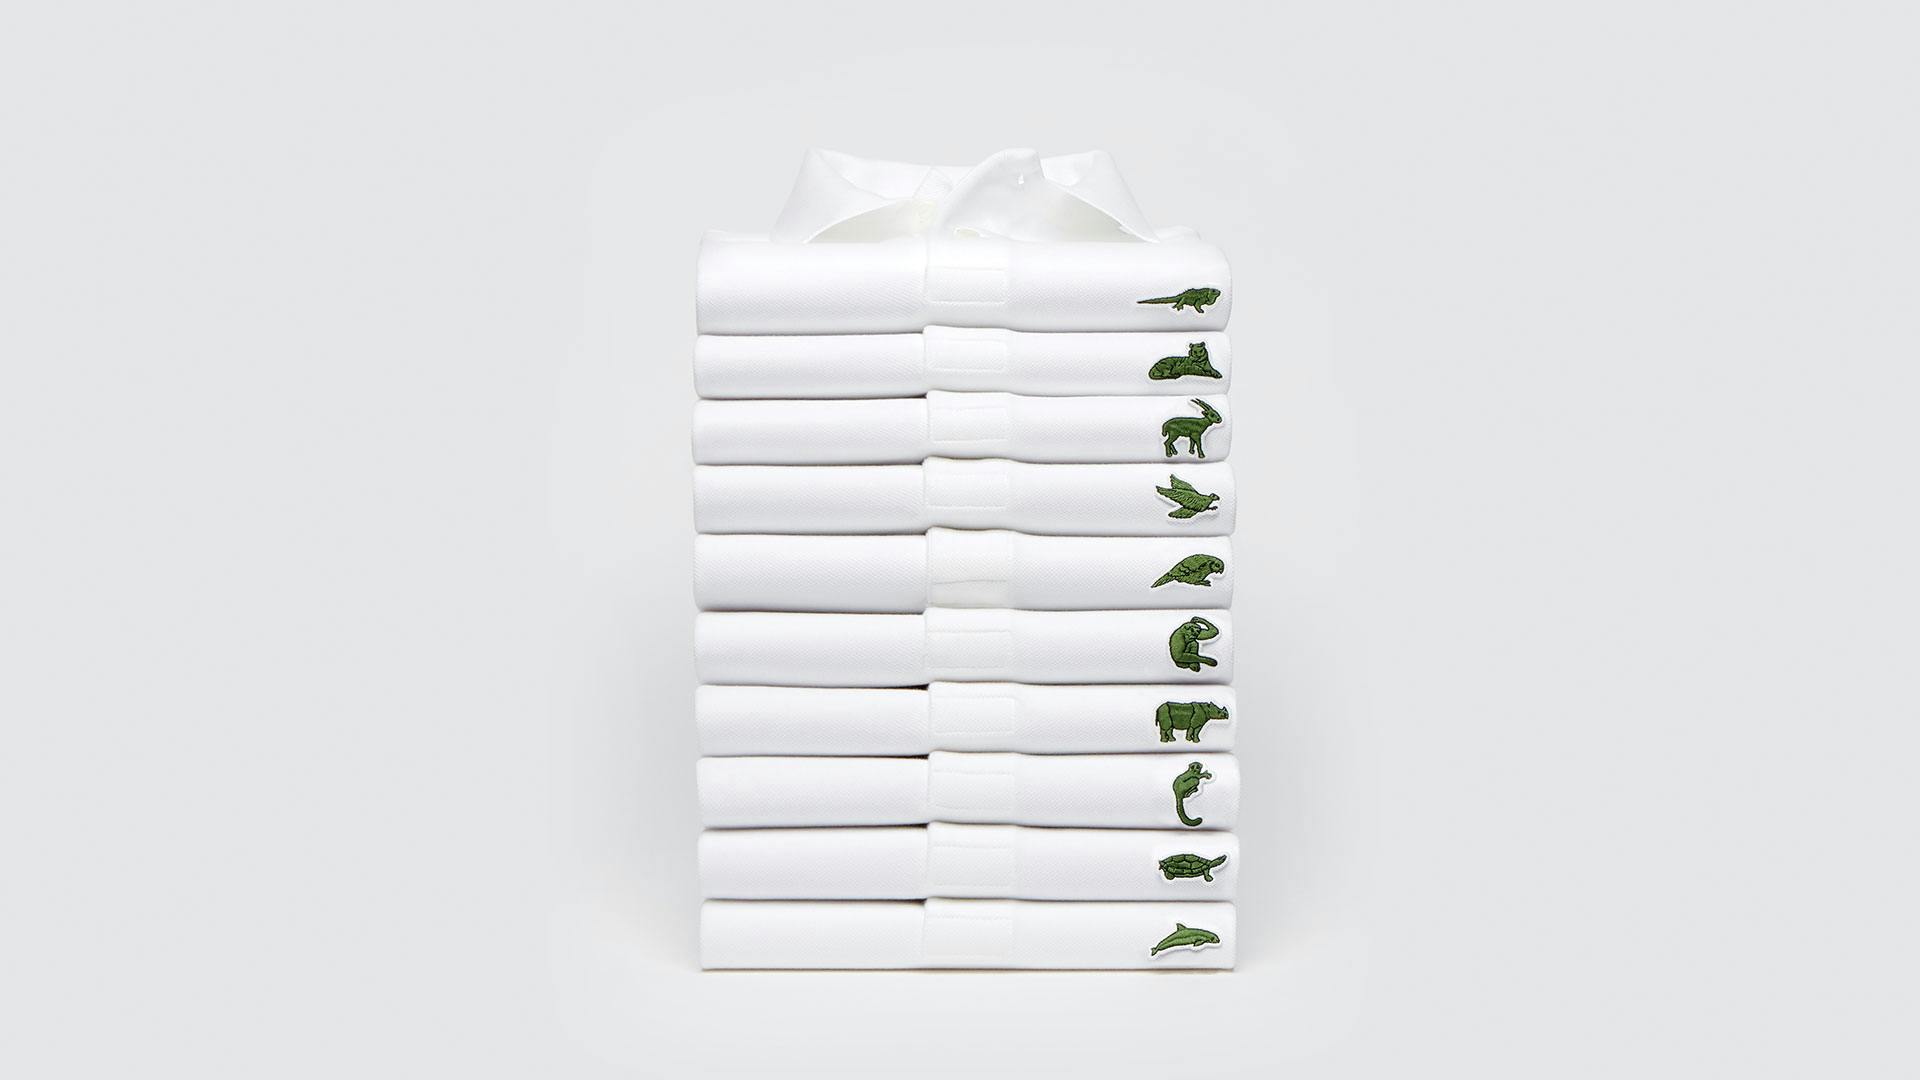 The History of Lacoste Brand  Founder of Lacoste Company and Brand  Breakdown 